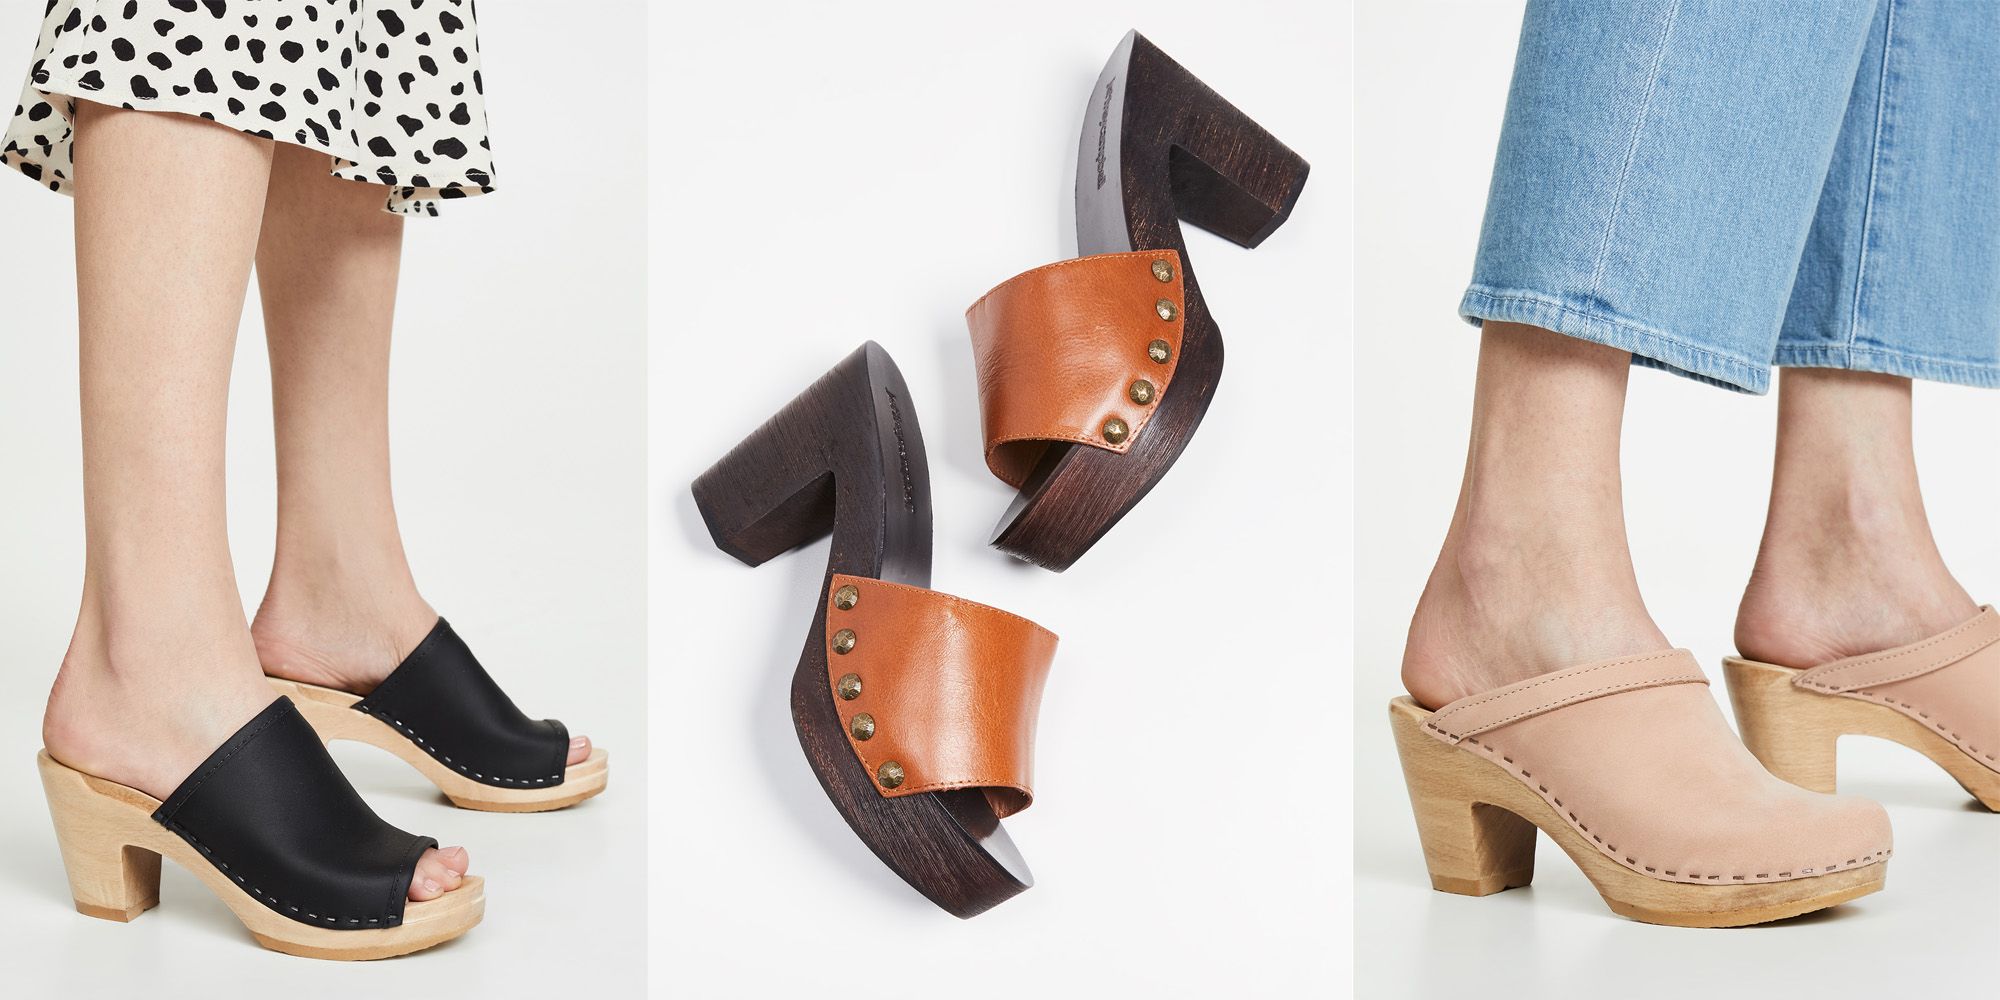 Clogs Are 2019's Newest Shoe Trend 